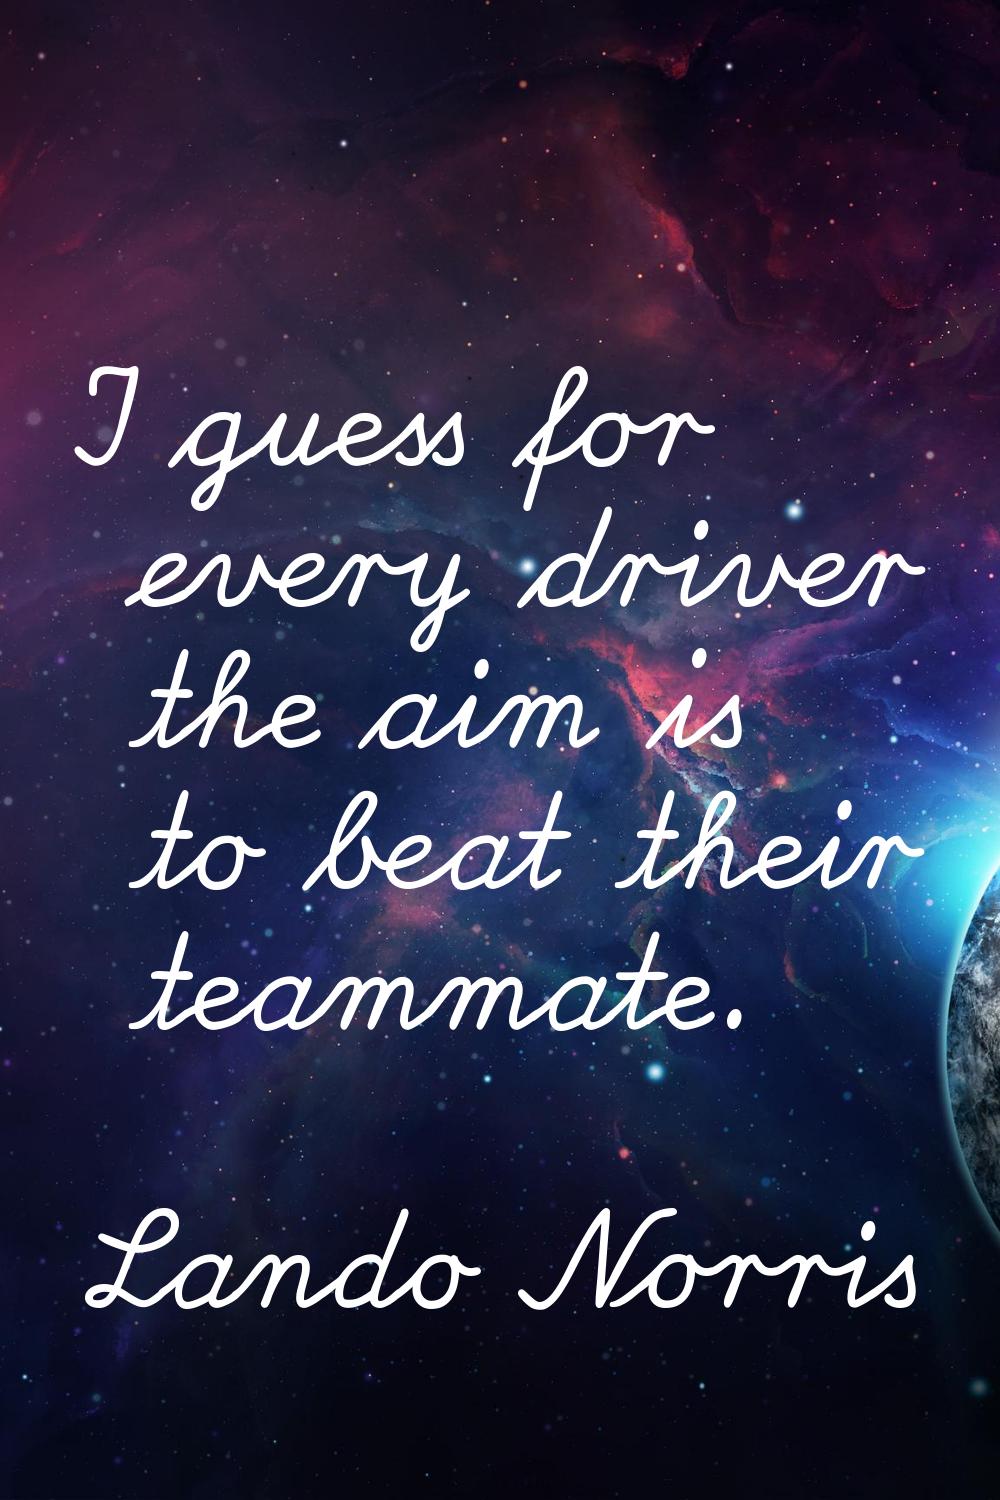 I guess for every driver the aim is to beat their teammate.